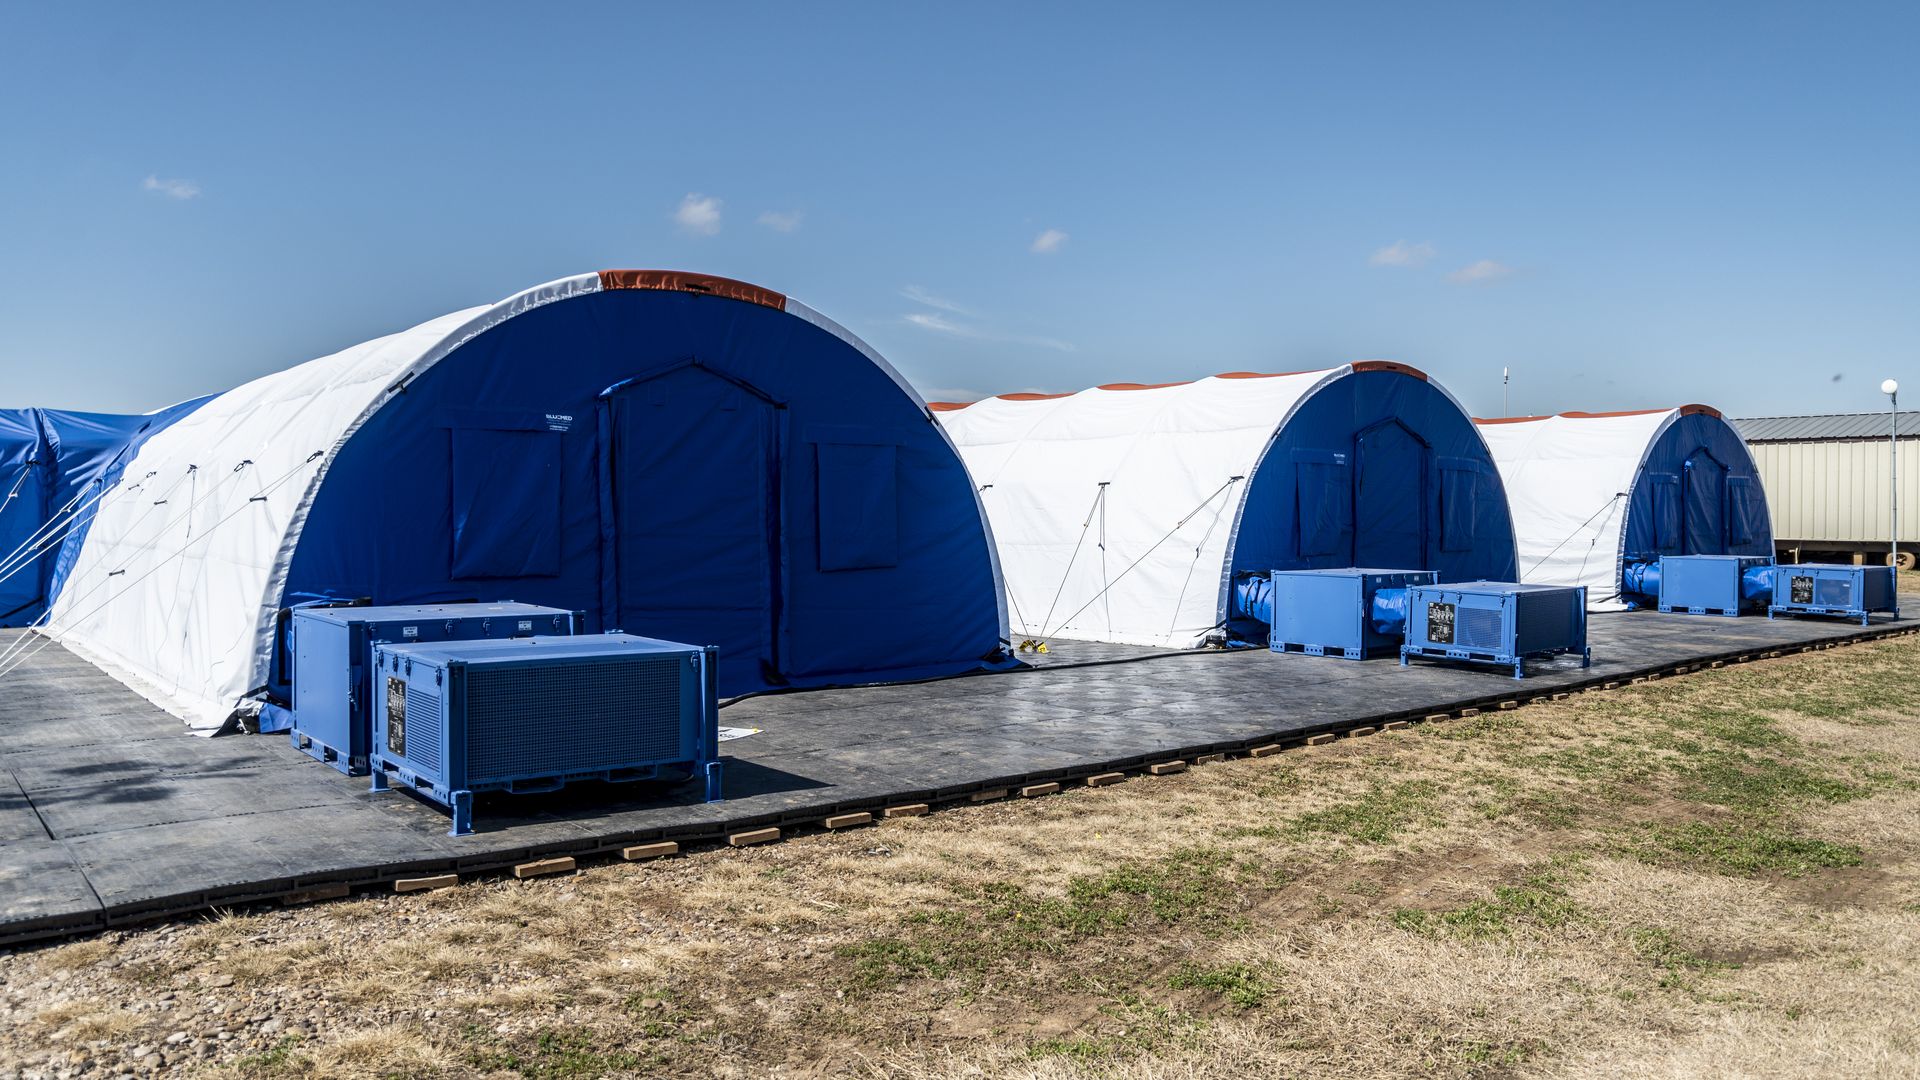  Intensive care tents sit in a row at a Influx Care Facility (ICF) for unaccompanied children Carrizo Springs, TX.